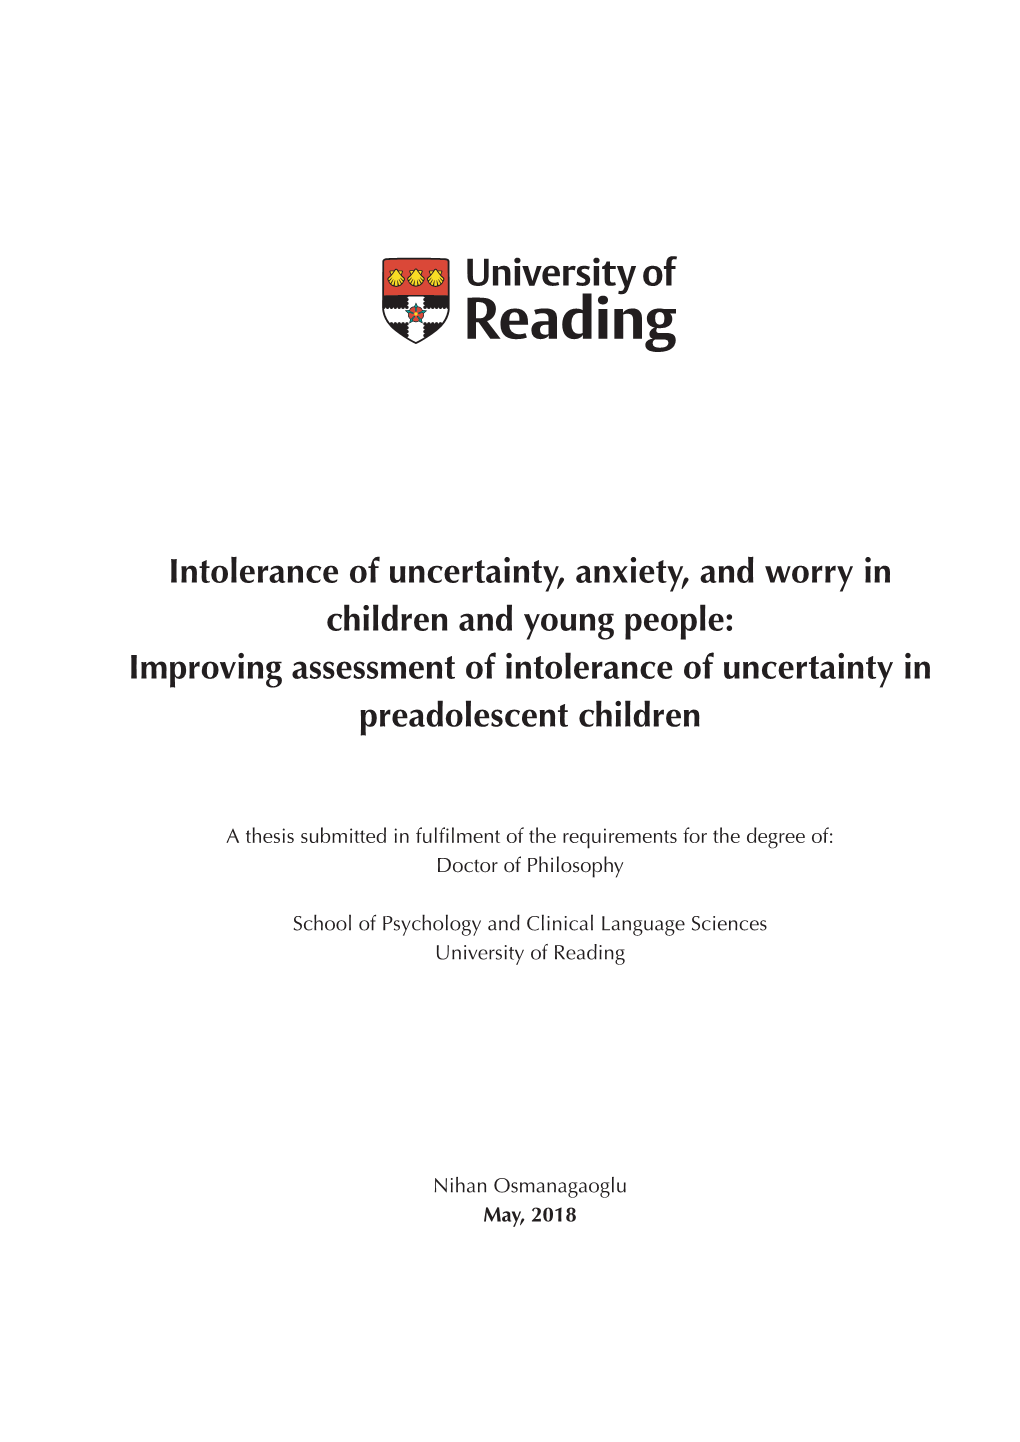 Intolerance of Uncertainty, Anxiety, and Worry in Children and Young People: Improving Assessment of Intolerance of Uncertainty in Preadolescent Children